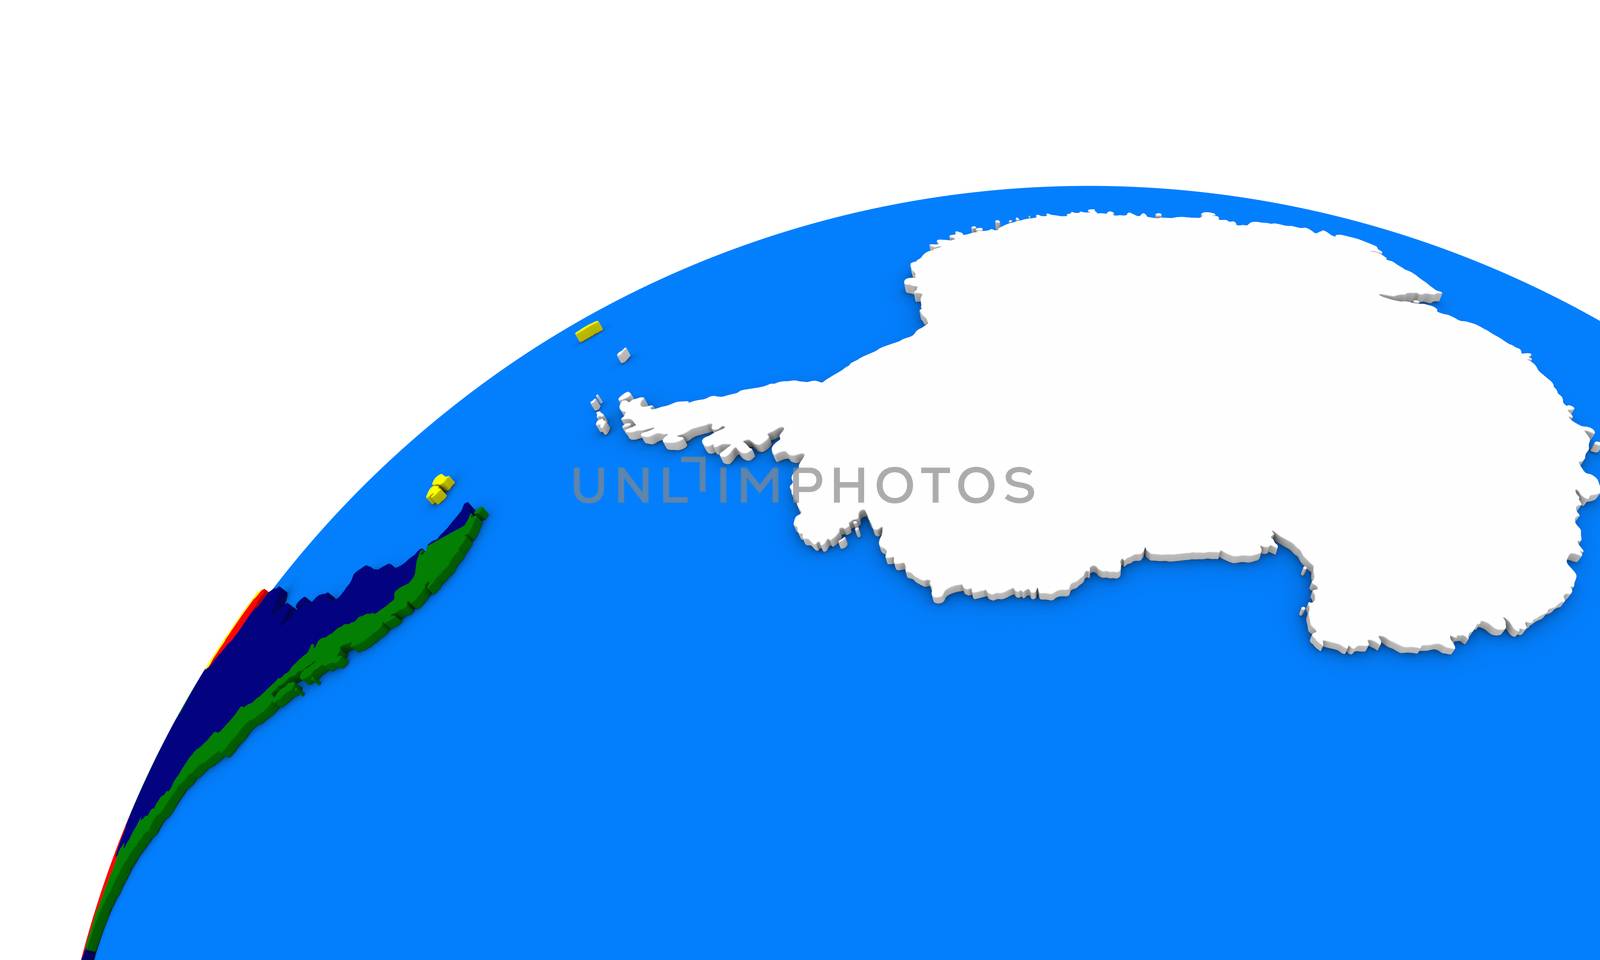 Antarctica on Earth by Harvepino